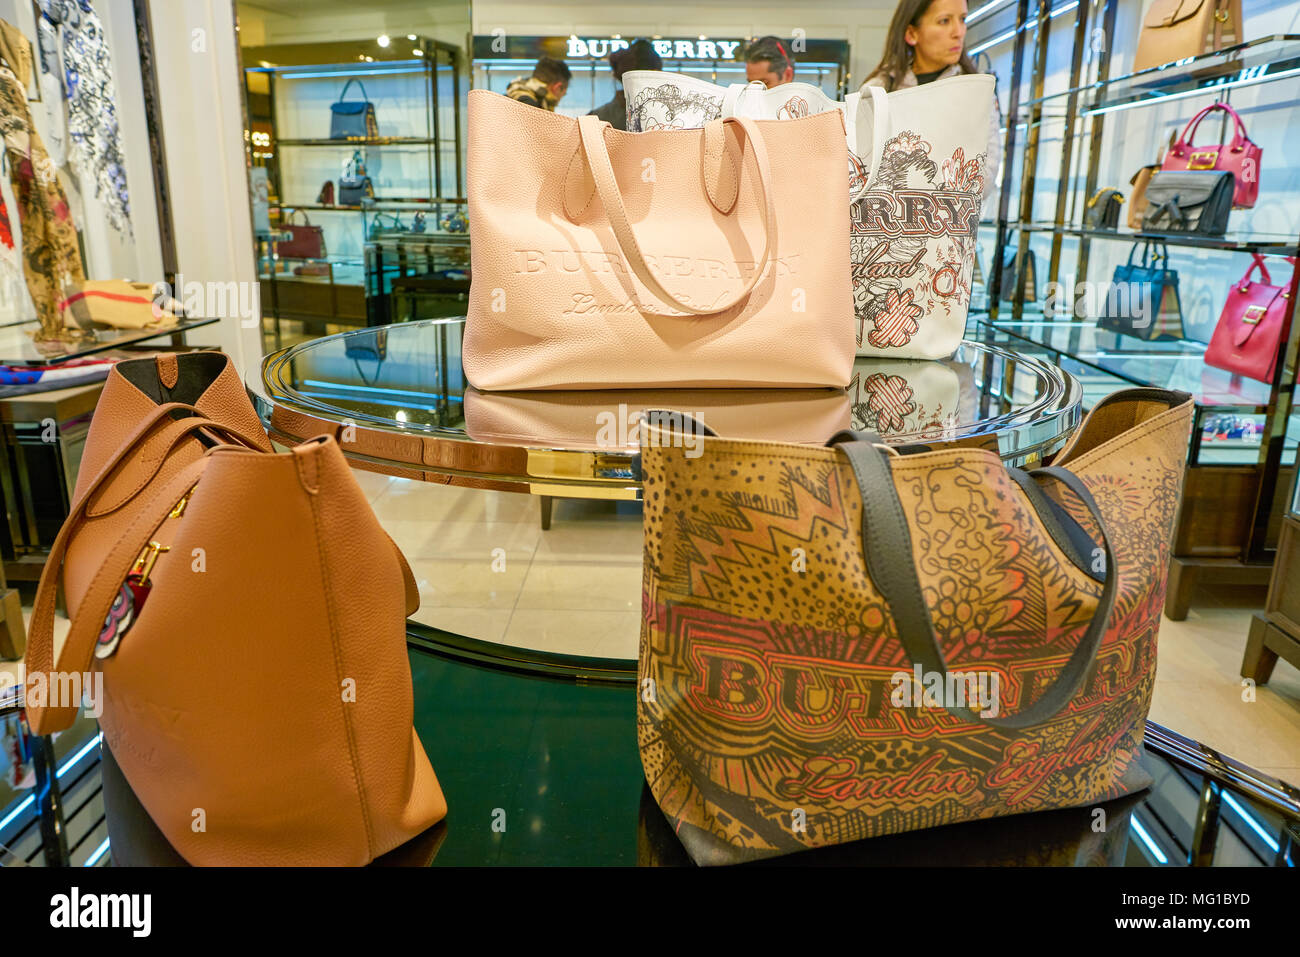 MILAN, ITALY - CIRCA NOVEMBER, 2017: Burberry bags on display at  Rinascente. Rinascente is a collection of high-end stores Stock Photo -  Alamy